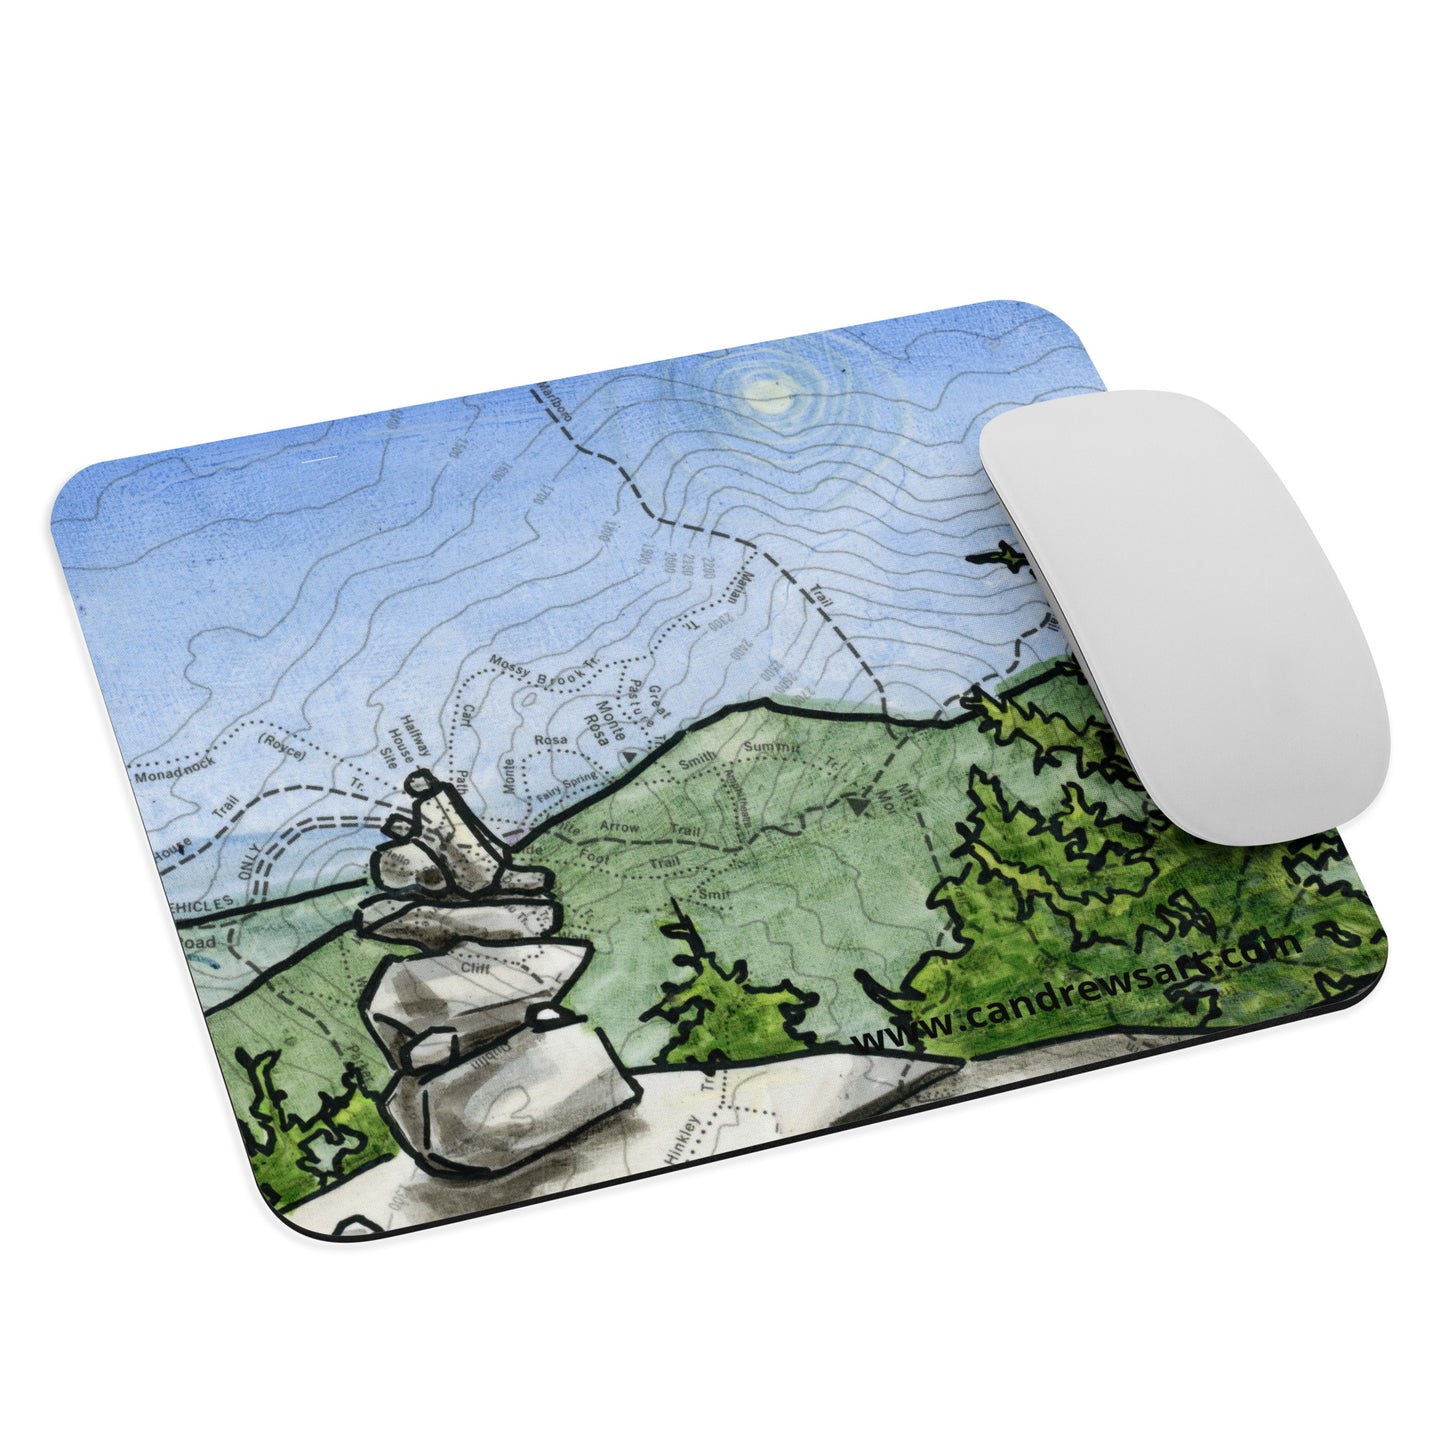 Cairn Mouse pad